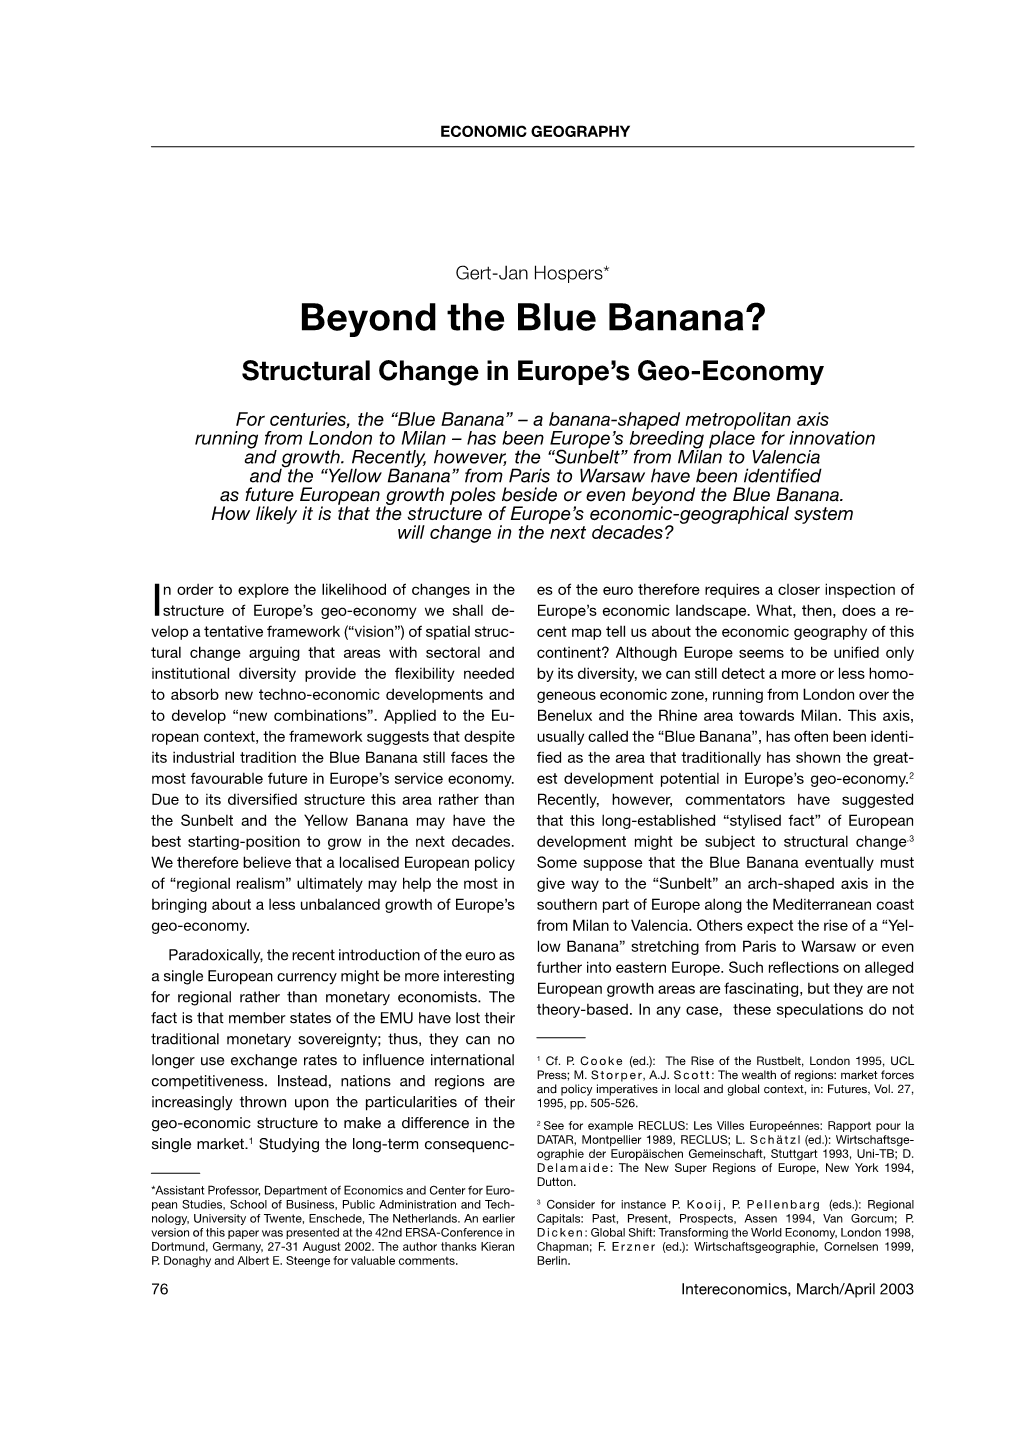 Beyond the Blue Banana? Structural Change in Europe’S Geo-Economy